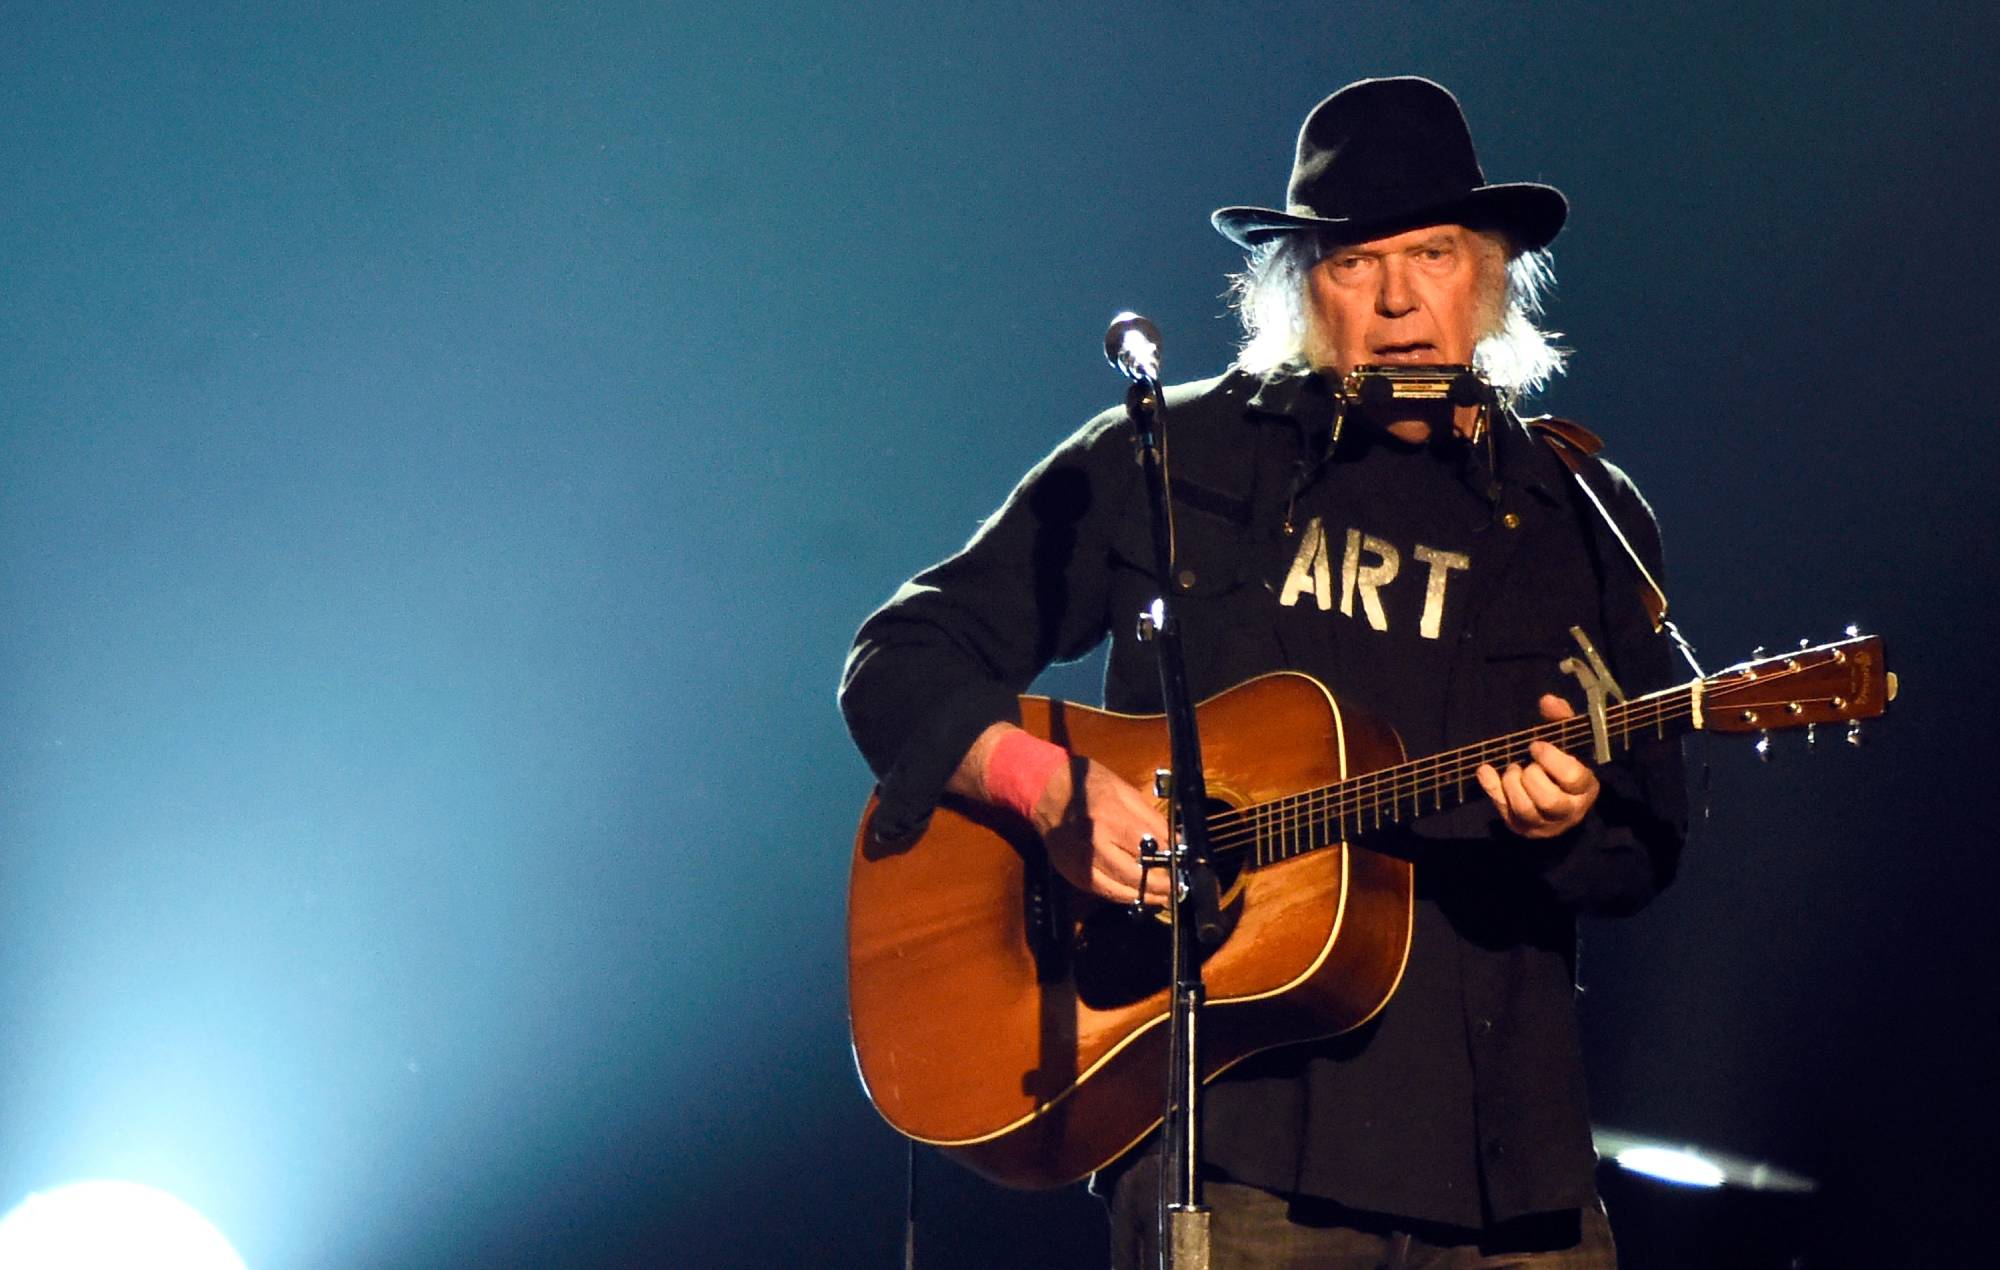 Neil Young announces return to stage after cancelling shows due to illness